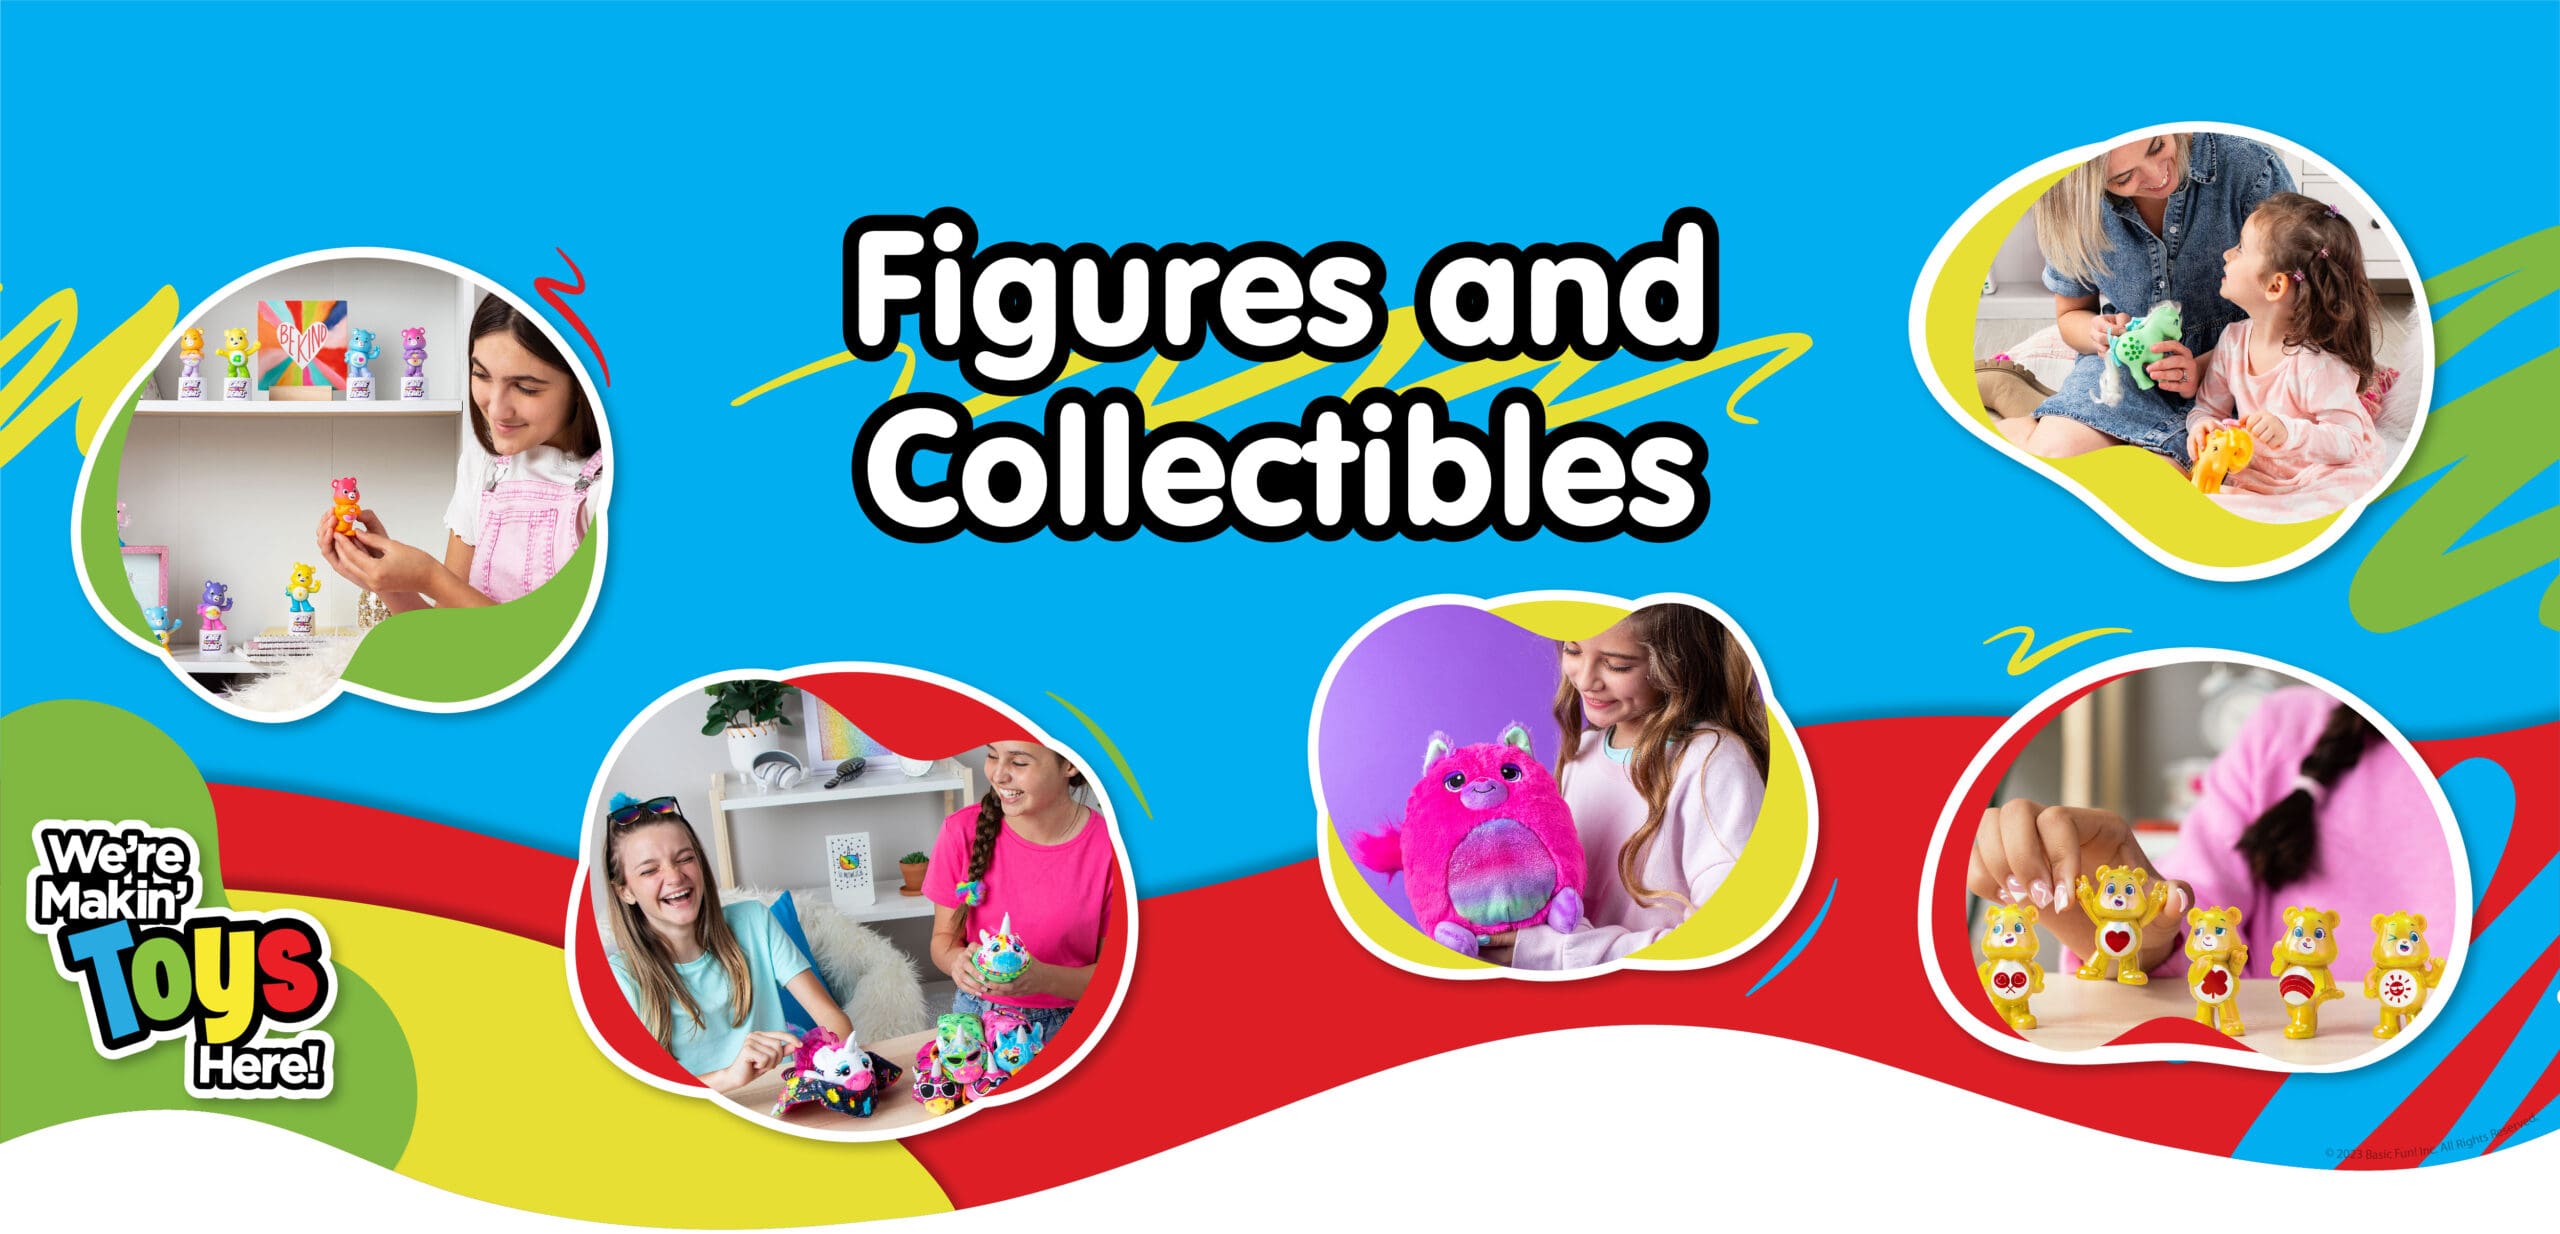 Figures and Collectibles banner featuring kids playing with toys